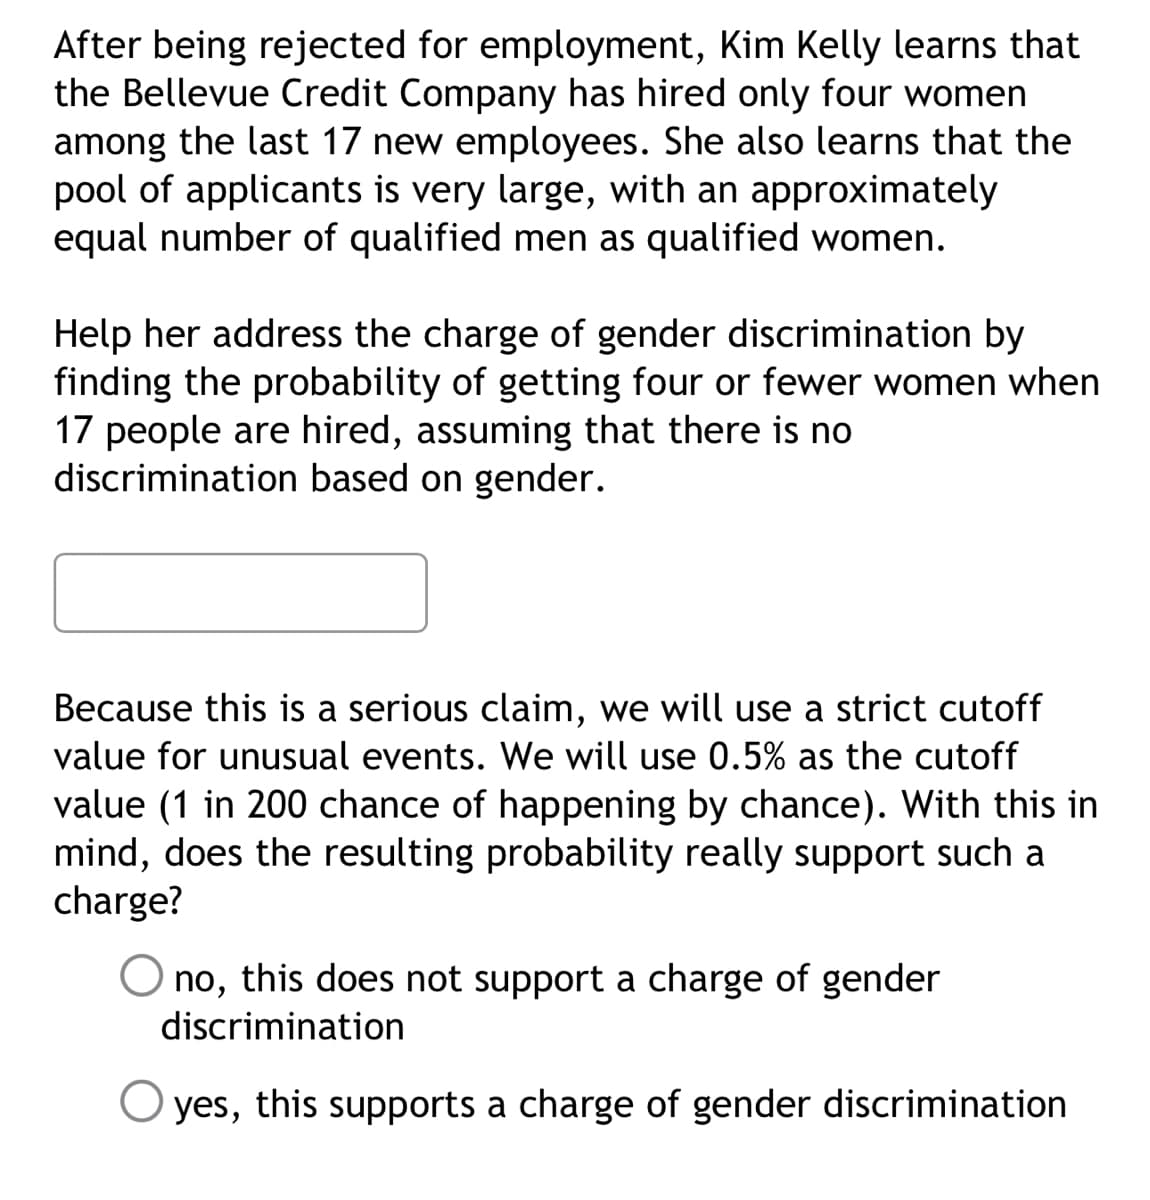 After being rejected for employment, Kim Kelly learns that
the Bellevue Credit Company has hired only four women
among the last 17 new employees. She also learns that the
pool of applicants is very large, with an approximately
equal number of qualified men as qualified women.
Help her address the charge of gender discrimination by
finding the probability of getting four or fewer women when
17 people are hired, assuming that there is no
discrimination based on gender.
Because this is a serious claim, we will use a strict cutoff
value for unusual events. We will use 0.5% as the cutoff
value (1 in 200 chance of happening by chance). With this in
mind, does the resulting probability really support such a
charge?
no, this does not support a charge of gender
discrimination
O yes, this supports a charge of gender discrimination